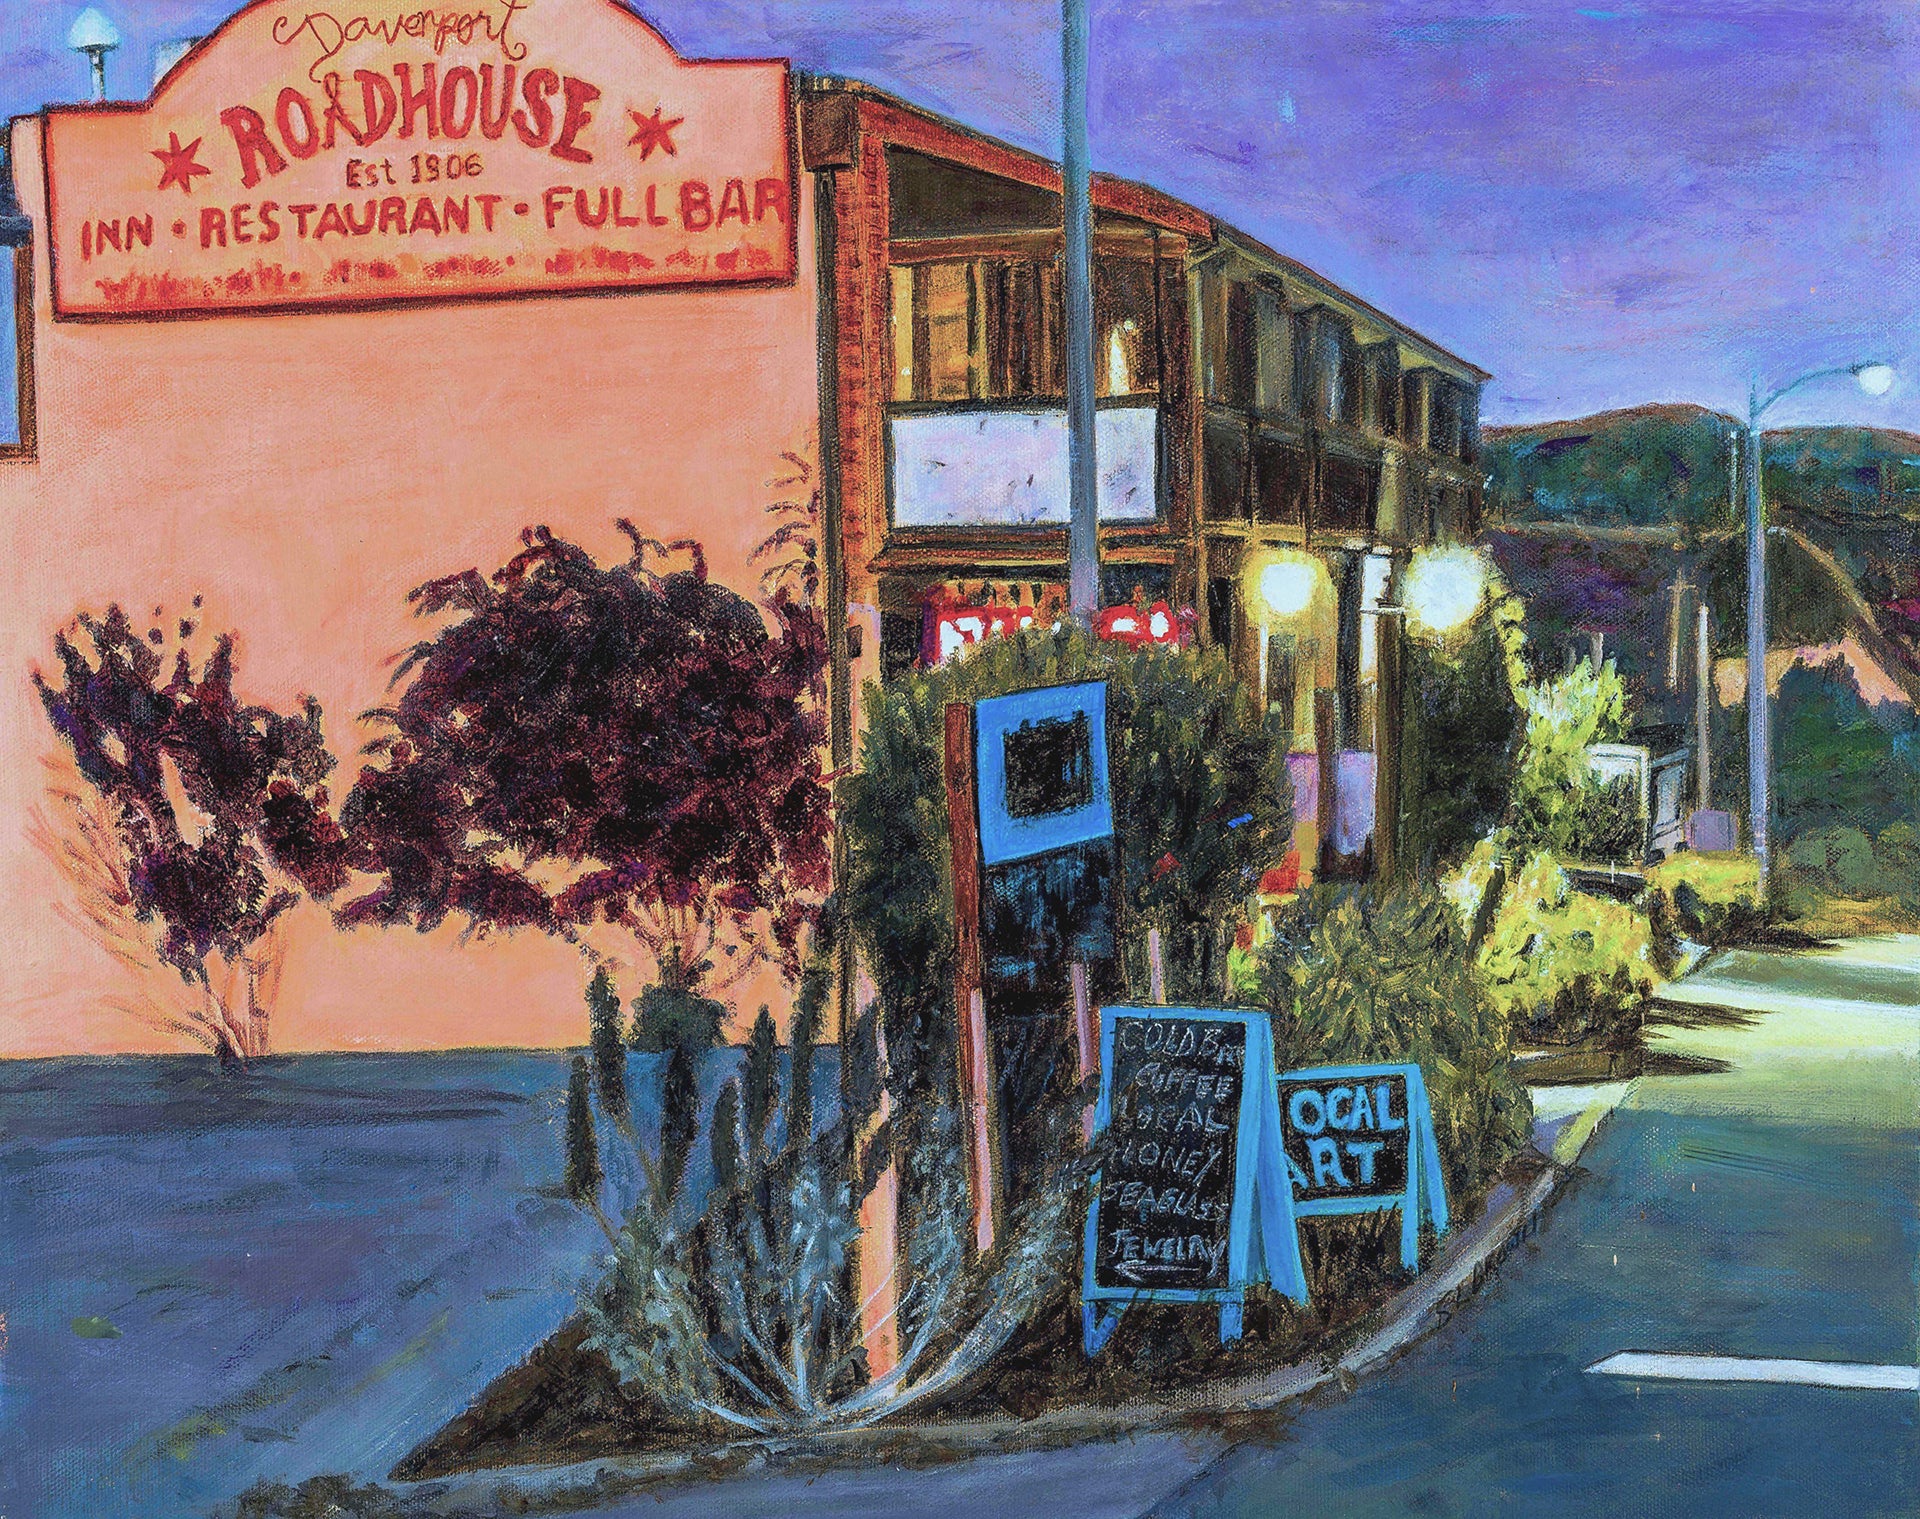 Davenport Roadhouse Evening by Susan Brown